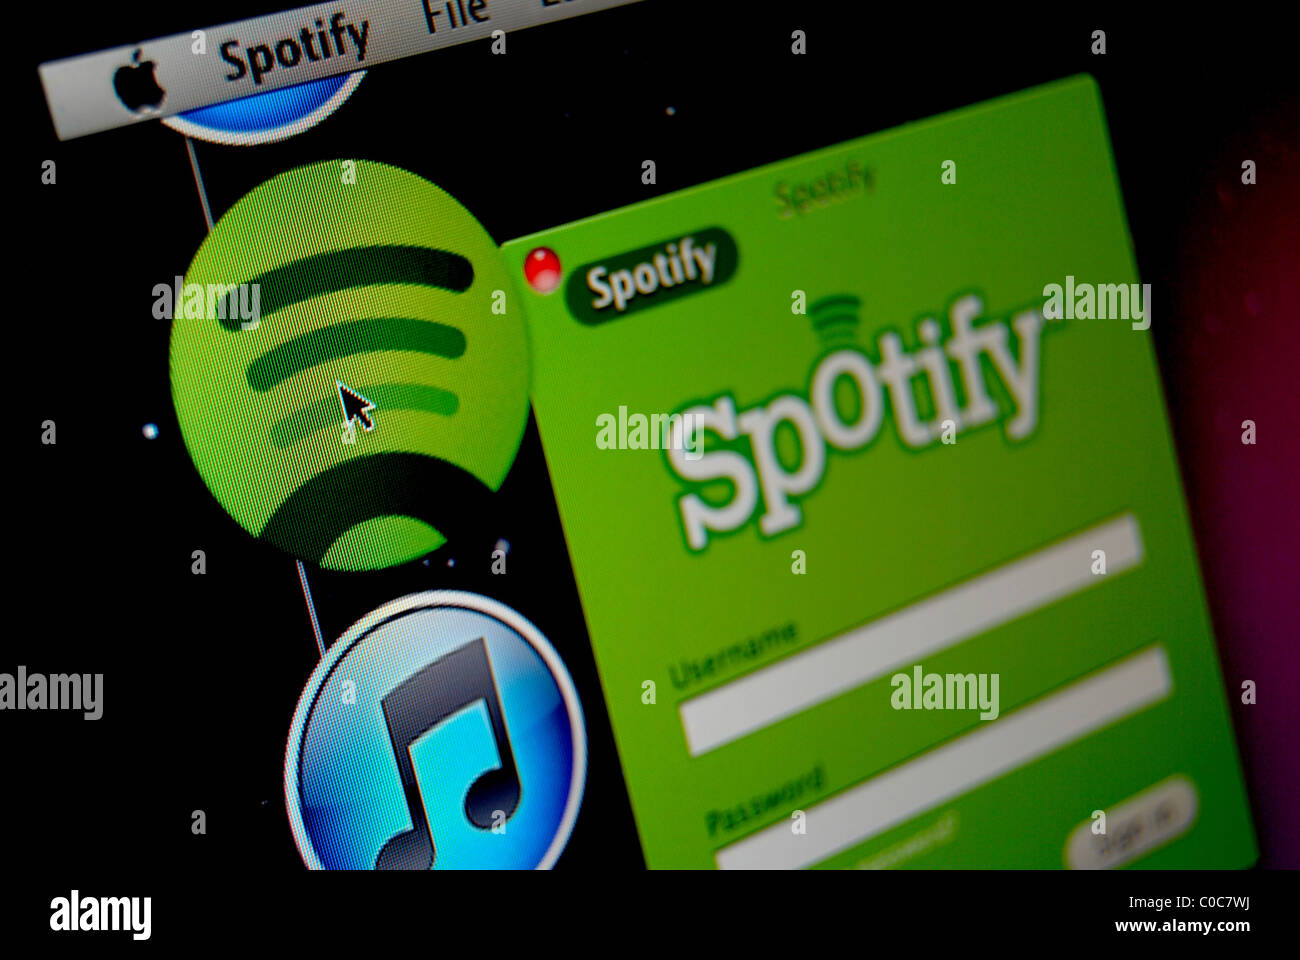 Photo Illustration of the Spotify Music Streaming Login On The Desktop Of A Apple MacBook Using OS X Snow Leopard Stock Photo